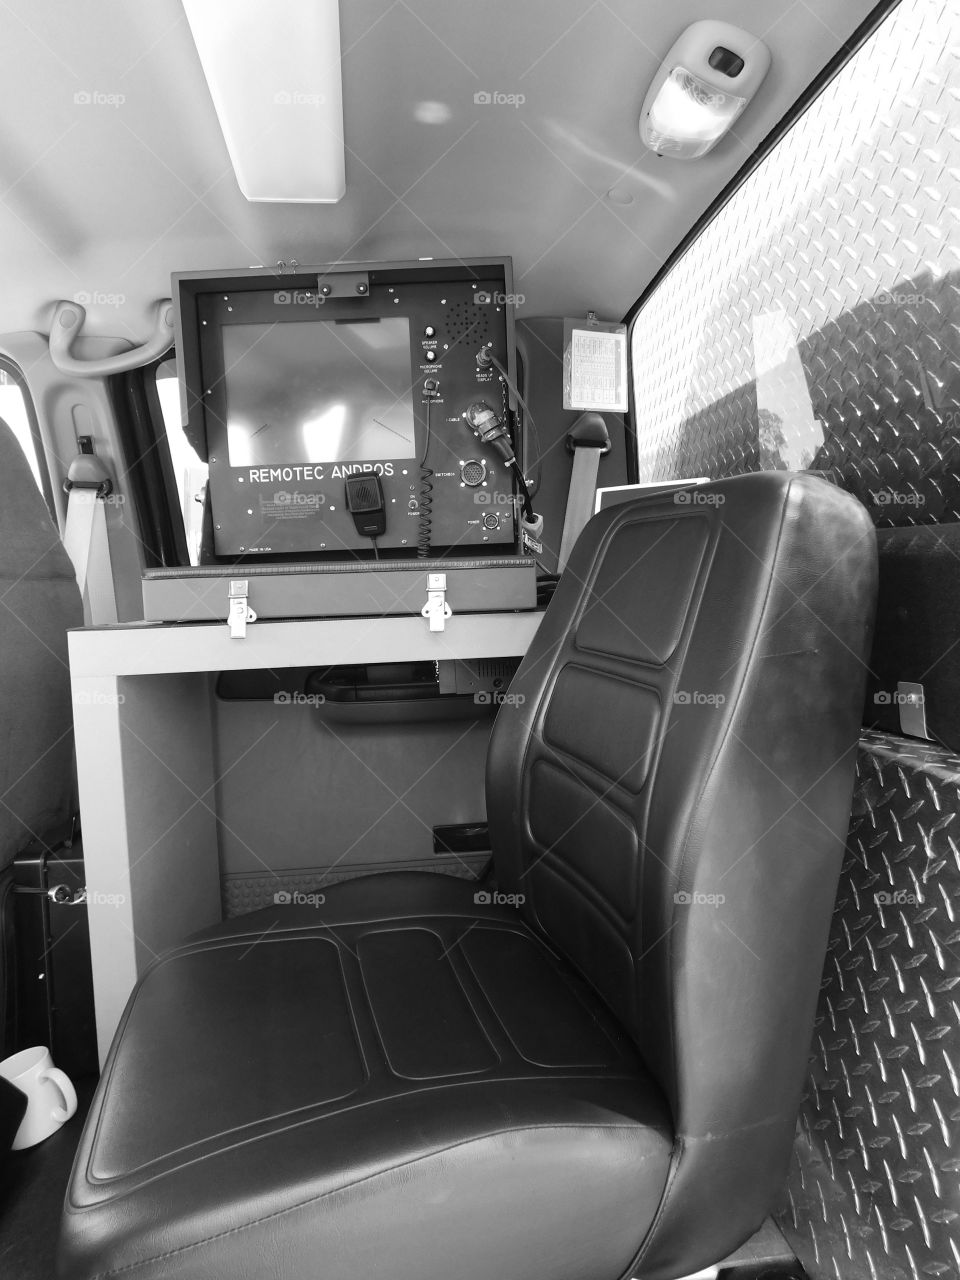 State of Florida Bomb Squad truck with sophisticated computer equipment to detect and assist Bomb Squad Technicians in the detection and removal explosives!